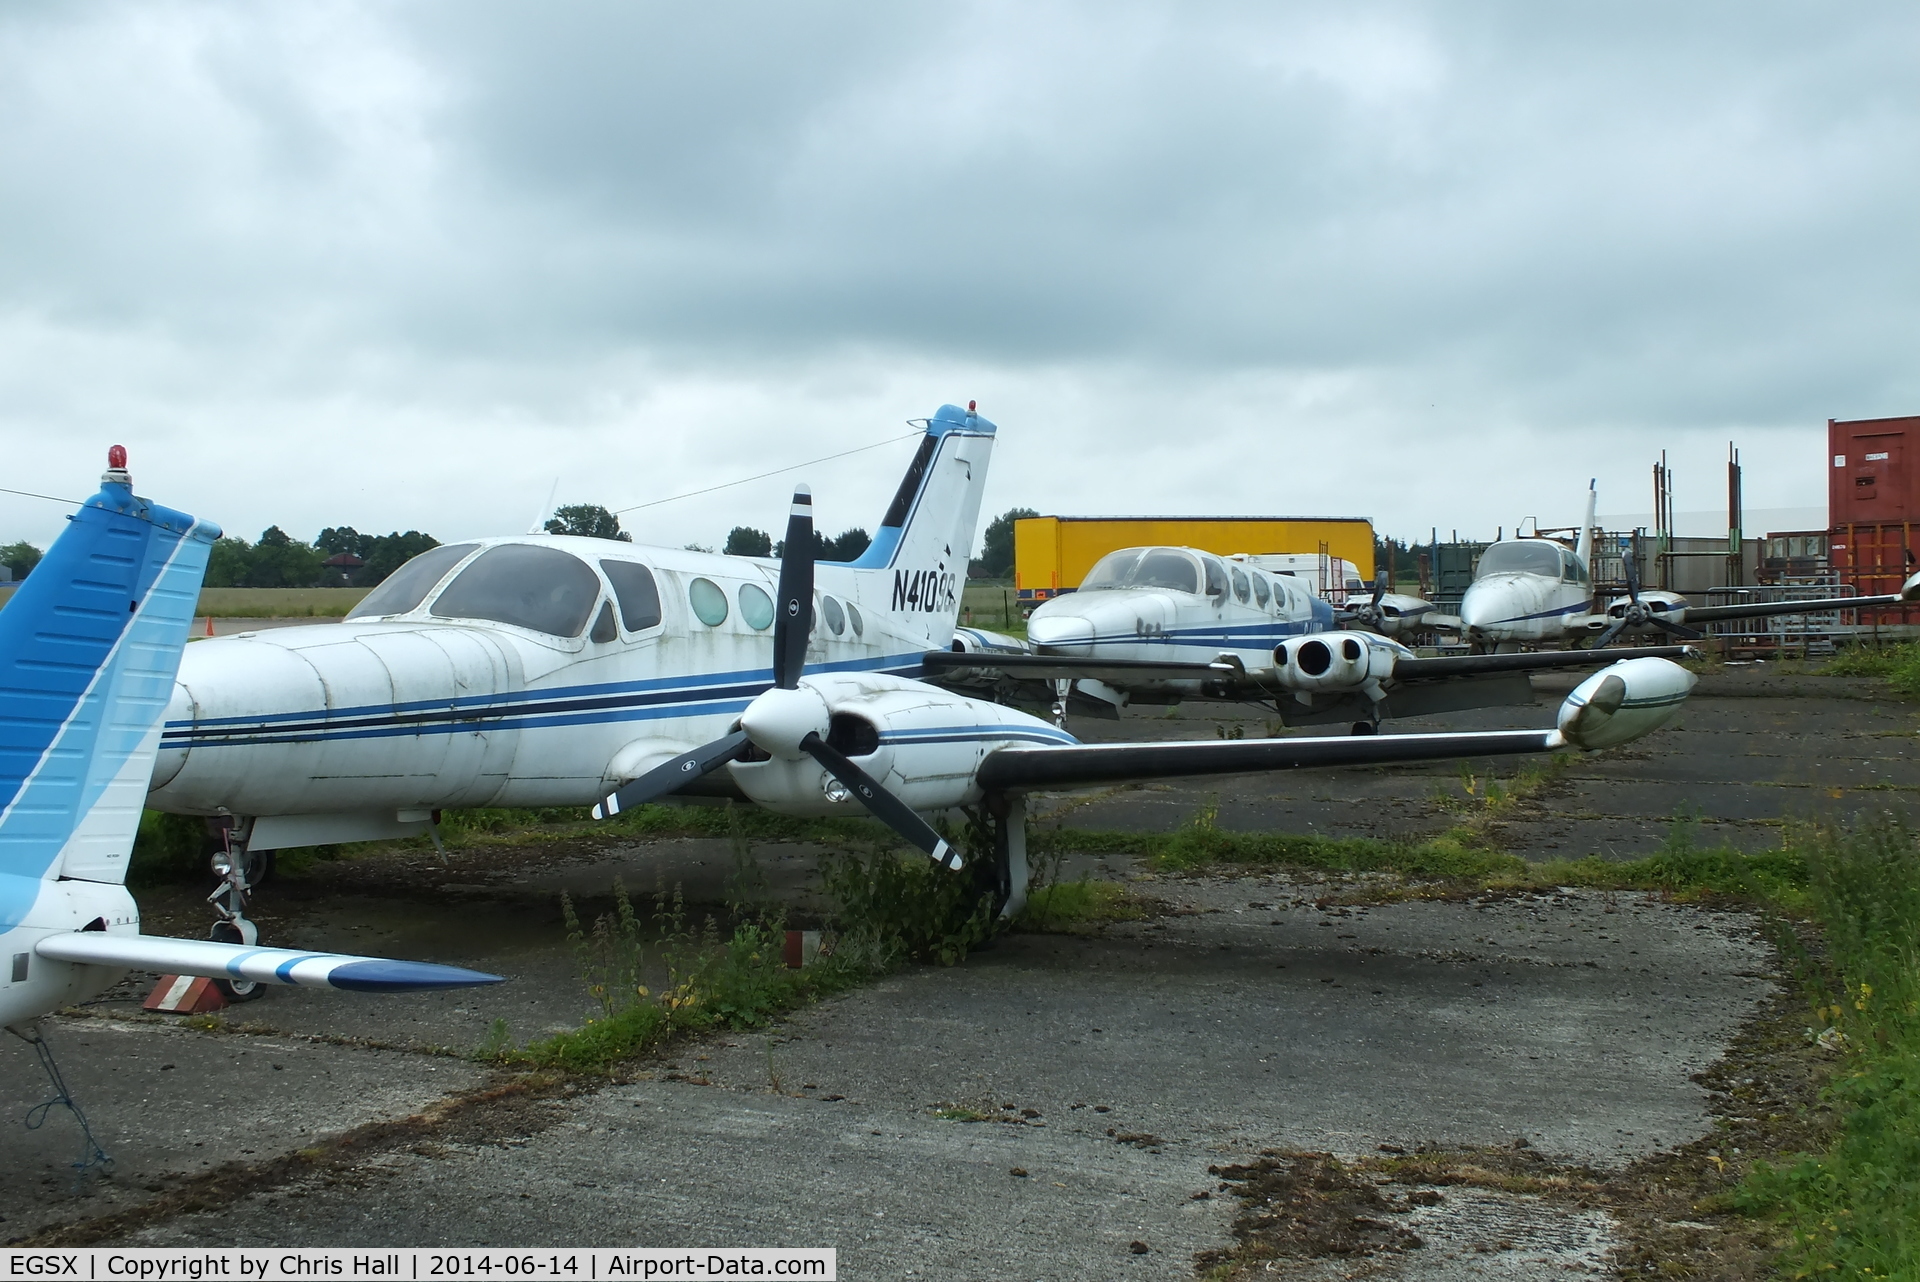 North Weald Airfield Airport, North Weald, England United Kingdom (EGSX) - the graveyard at North Weald